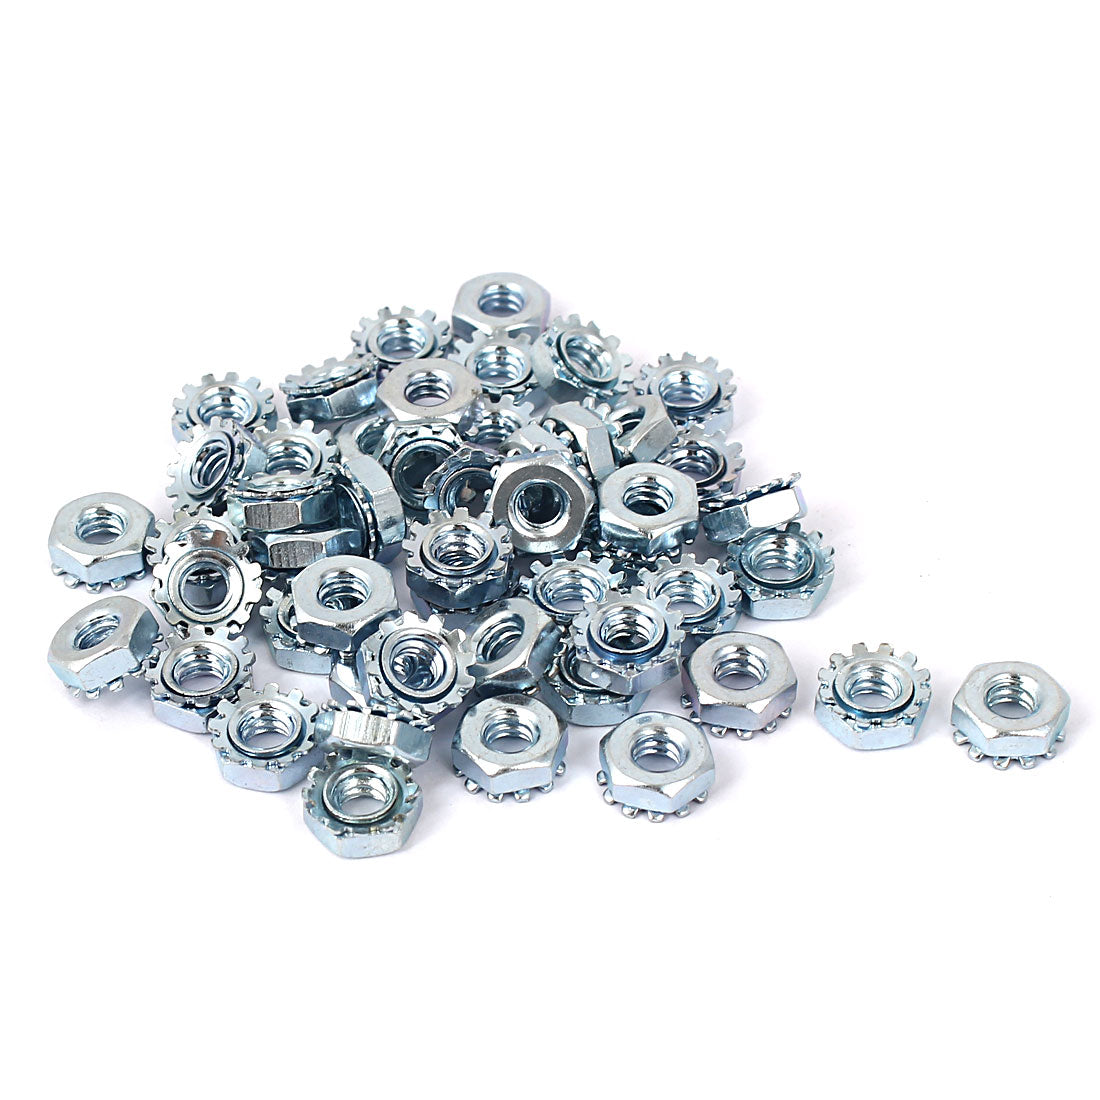 uxcell Uxcell 10#-24 Female Thread Zinc Plated External Tooth K Lock Kep Nut Silver Tone 50pcs